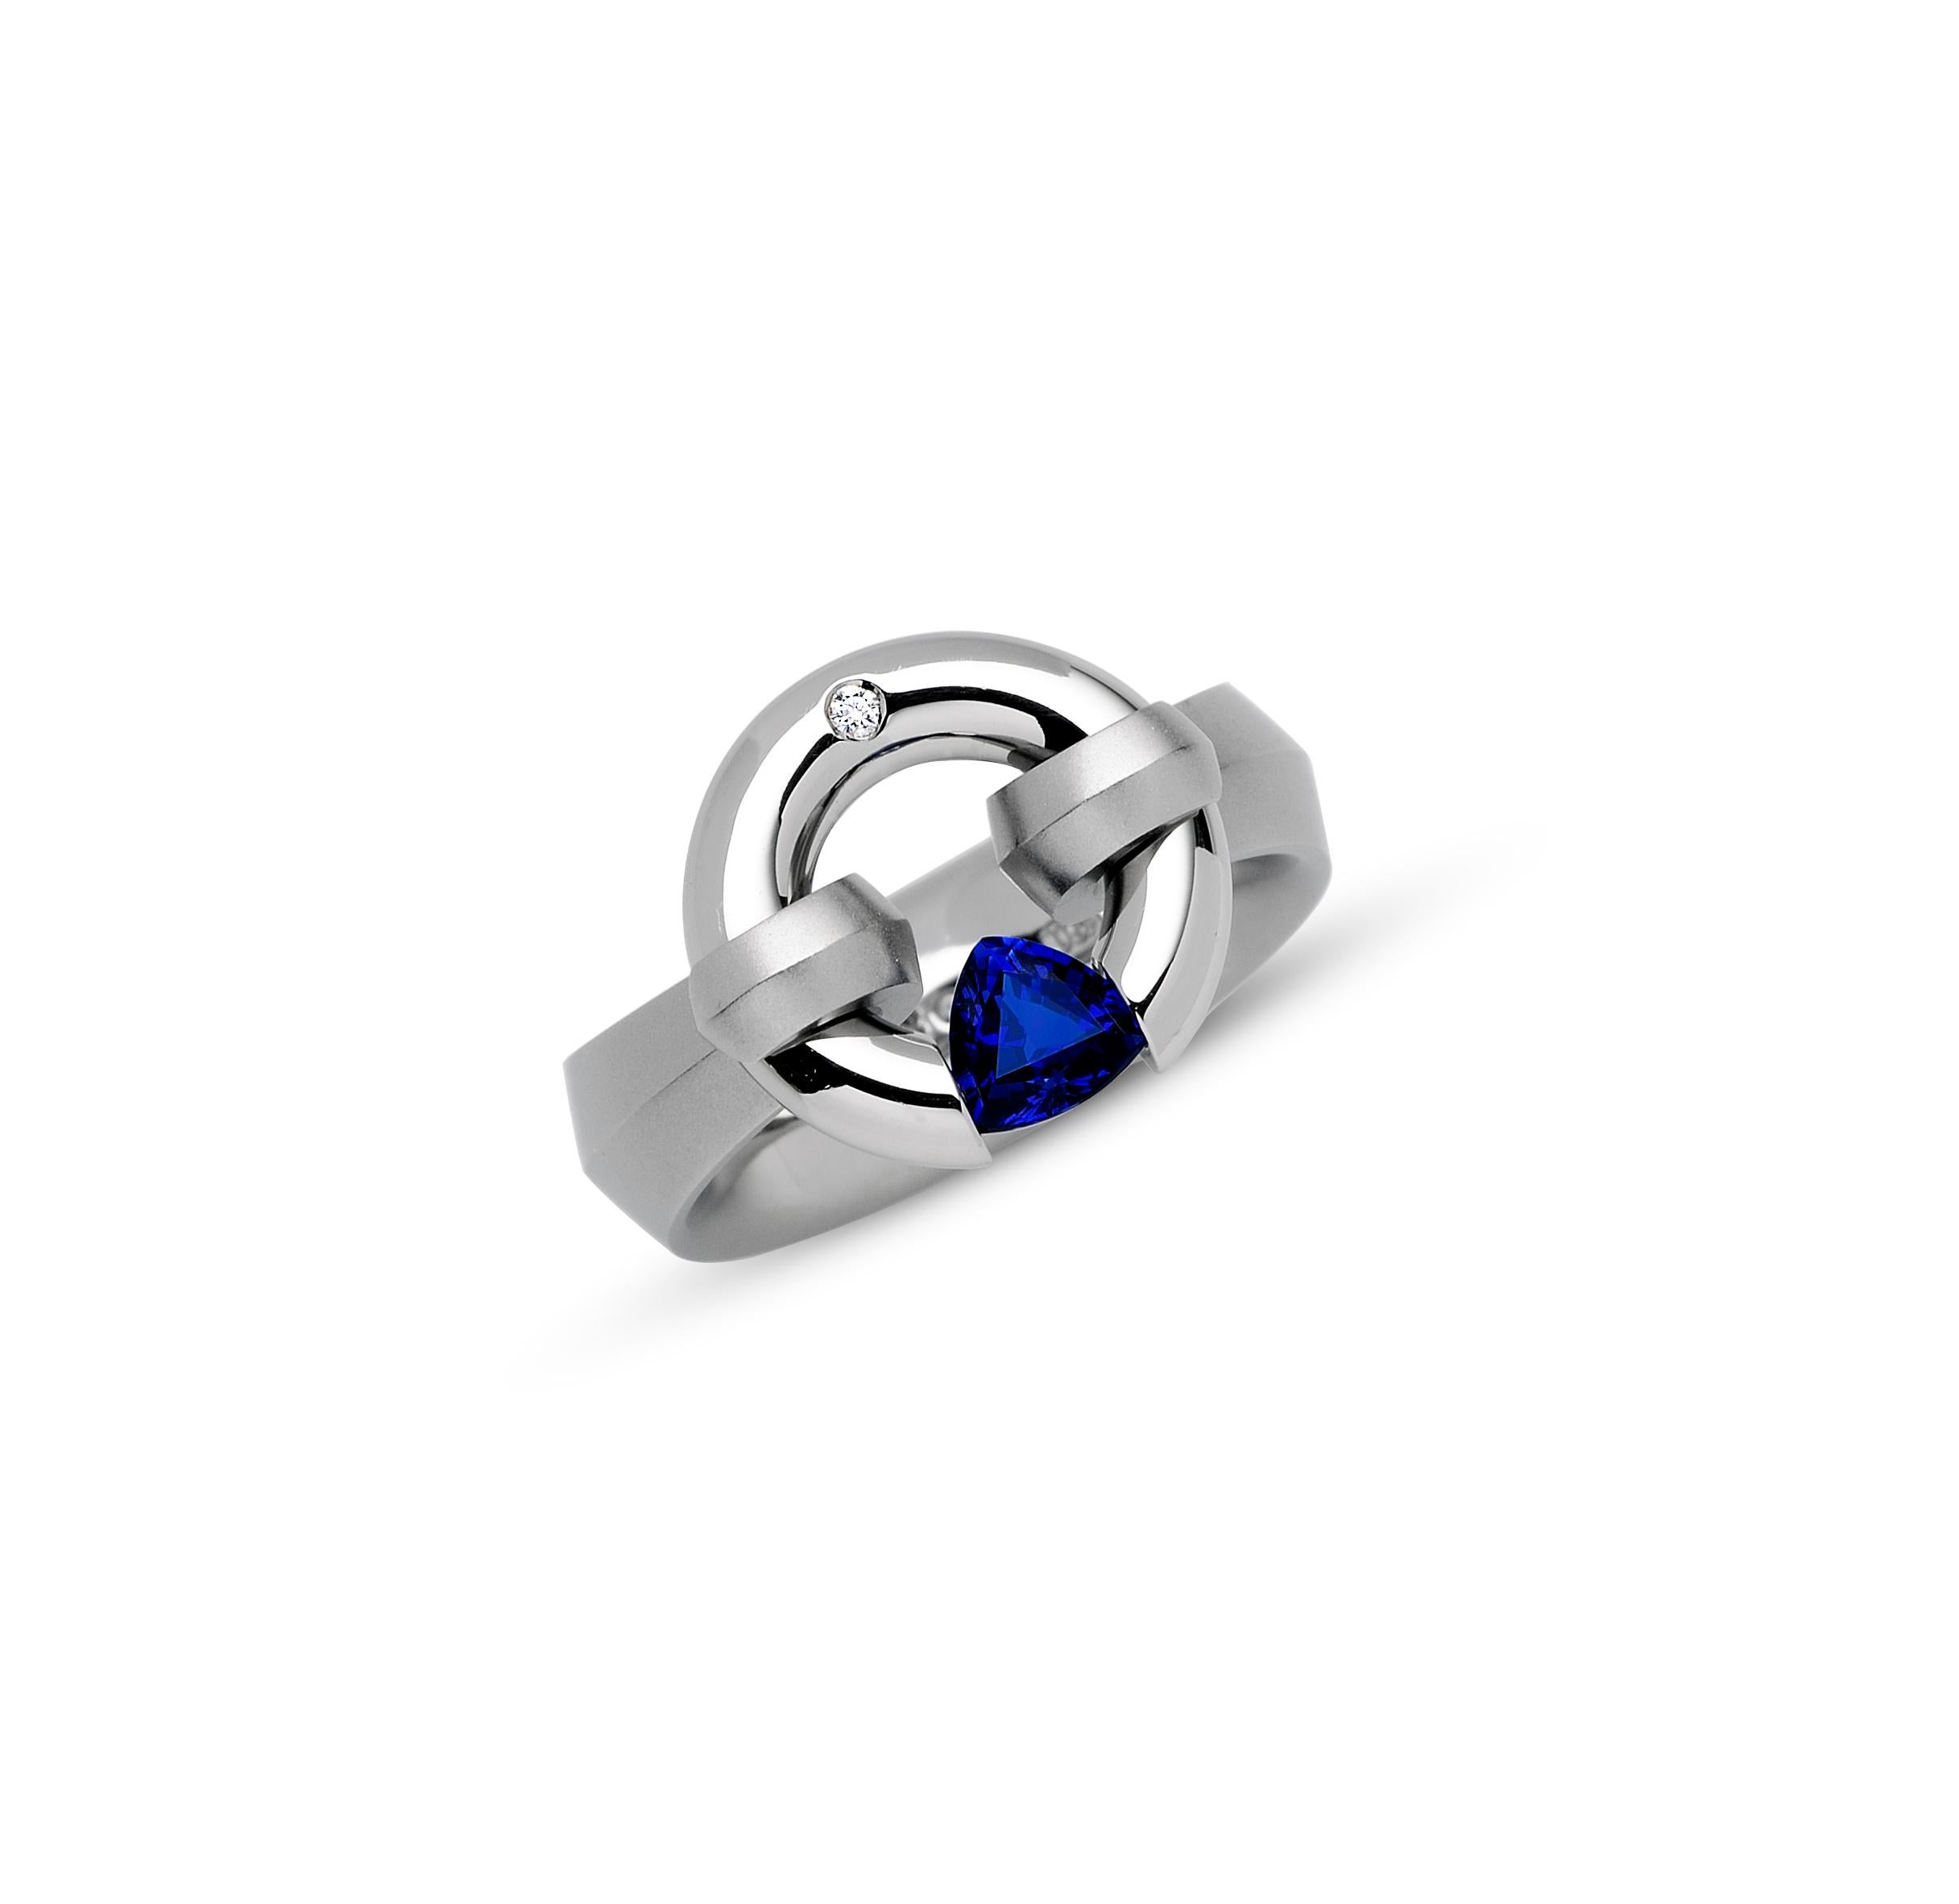 The Steven Kretchmer Wide Harp jazz Ring with a tension-set blue sapphire is handcrafted in platinum with a half matte finish. The 0.69 ct. trillion sapphire is a rich, royal blue (5mm). The 